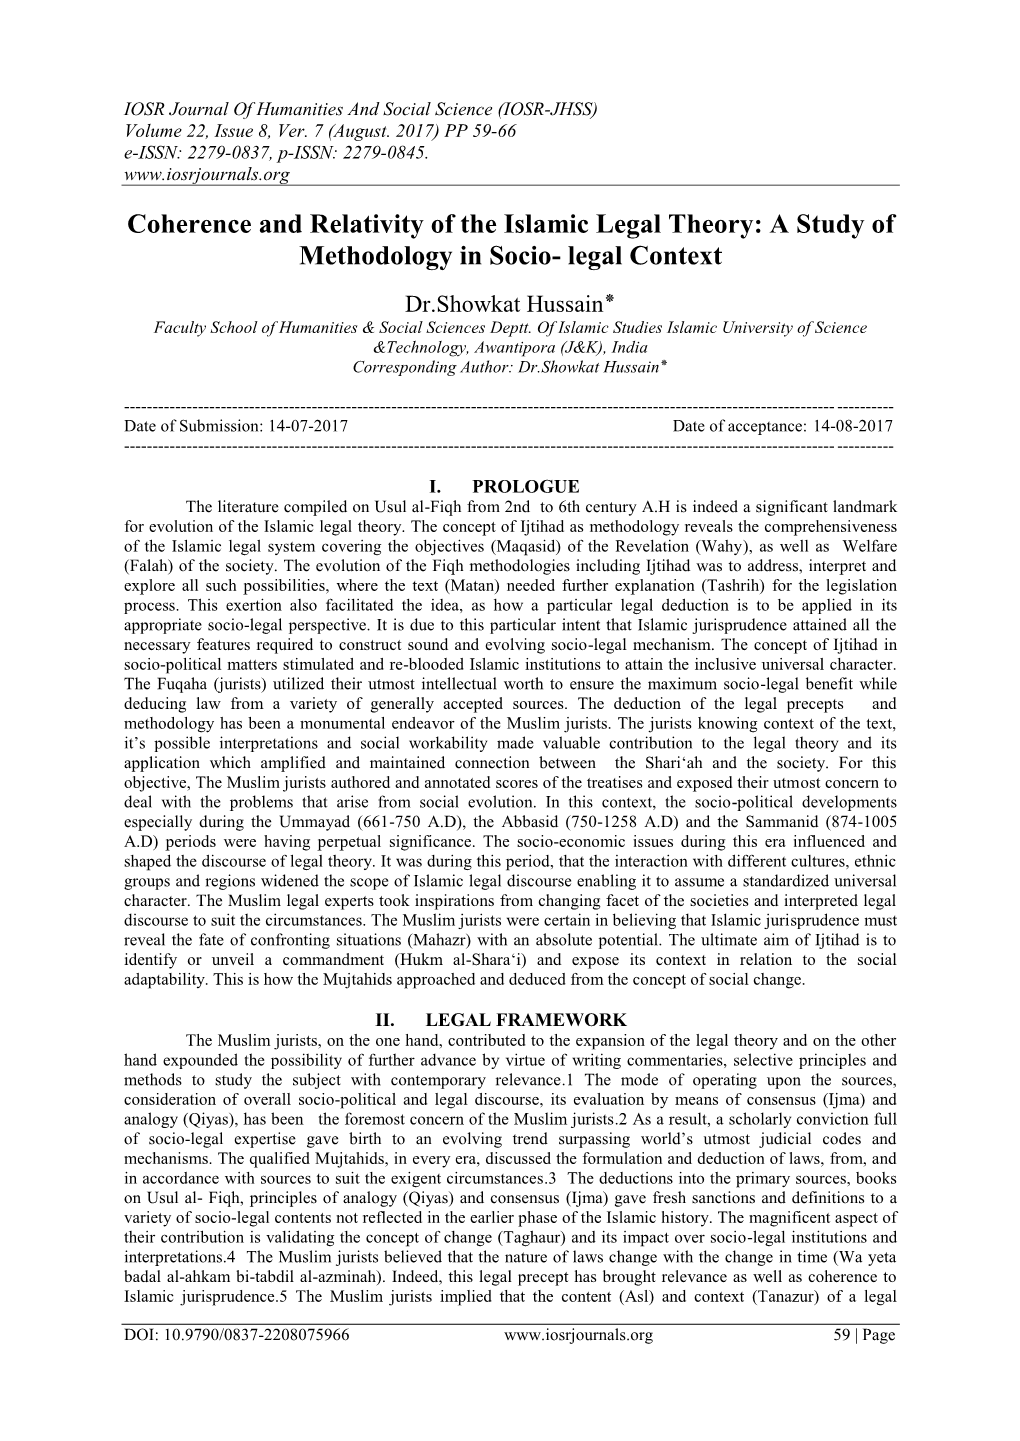 Coherence and Relativity of the Islamic Legal Theory: a Study of Methodology in Socio- Legal Context